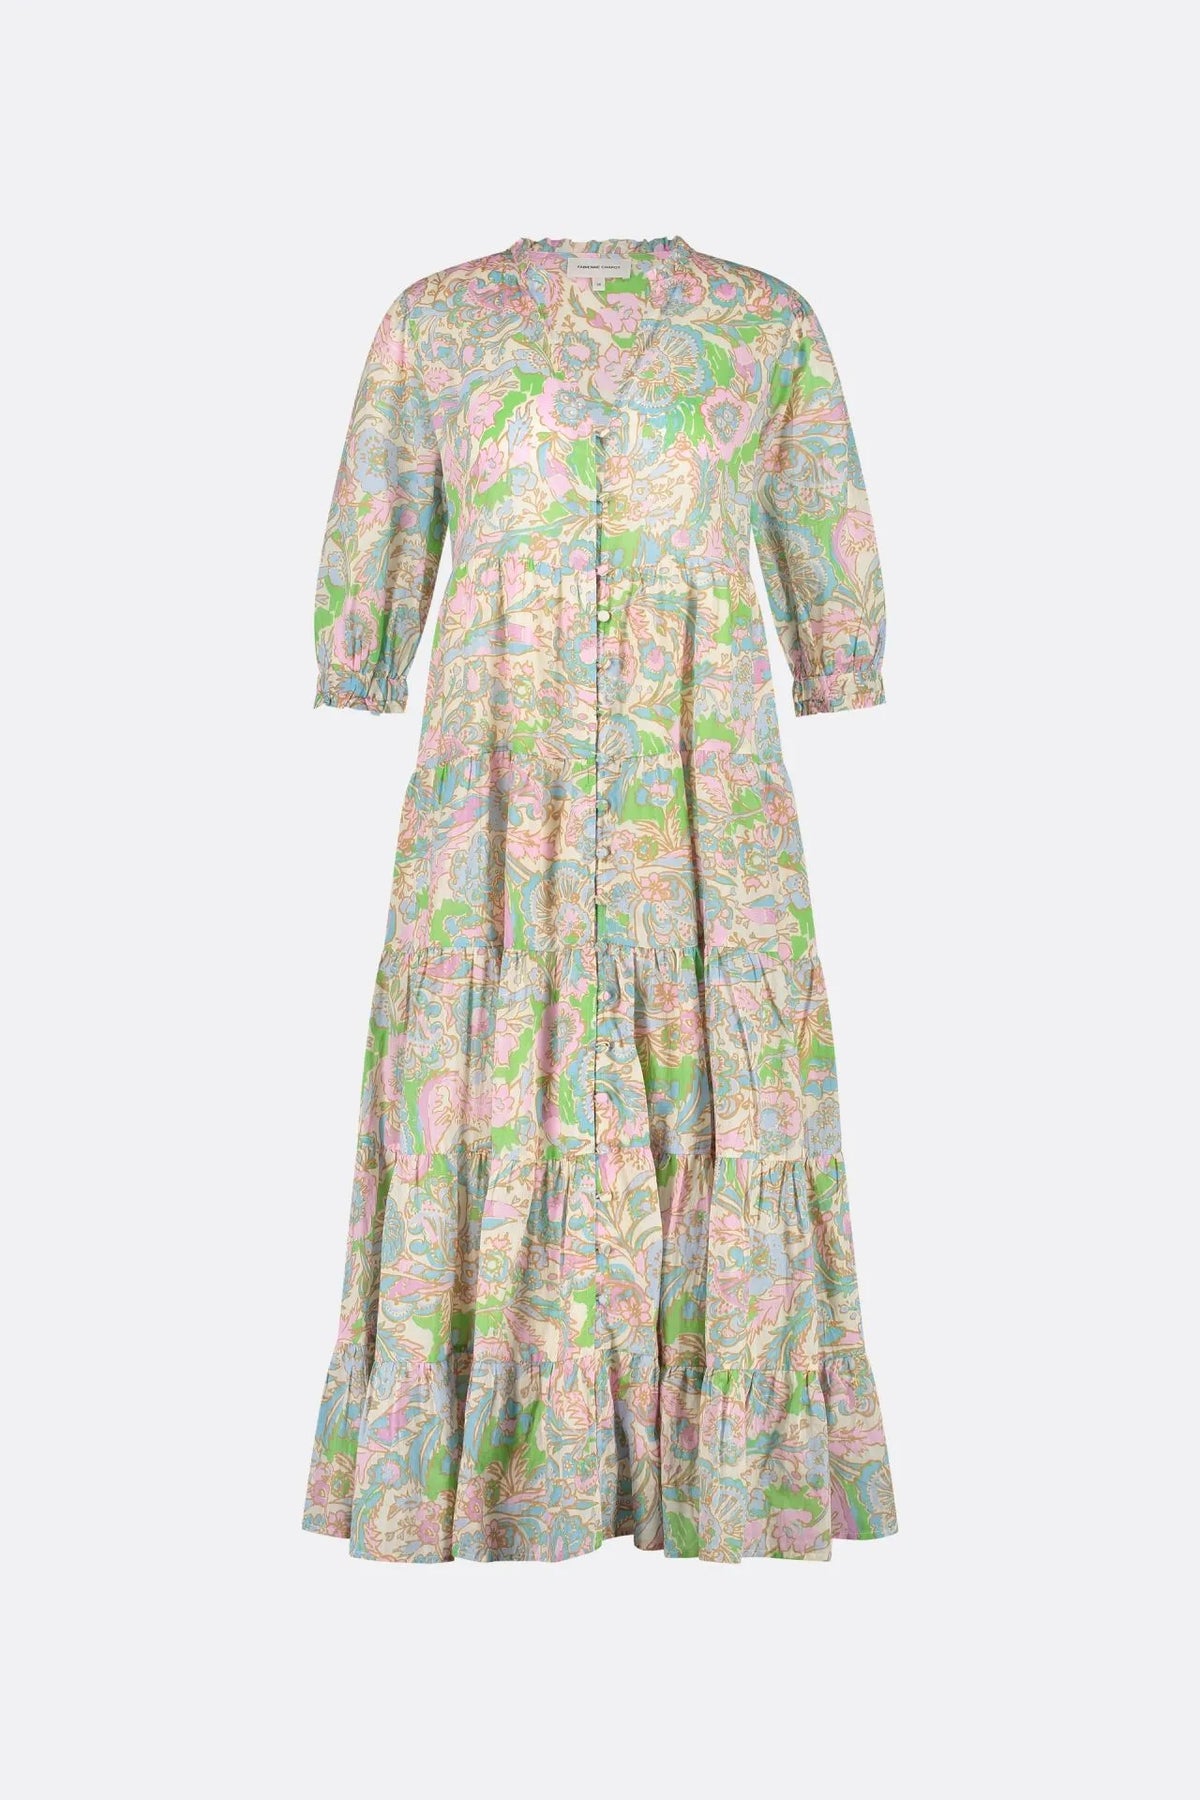 Floral print organic cotton dress with tiered skirt